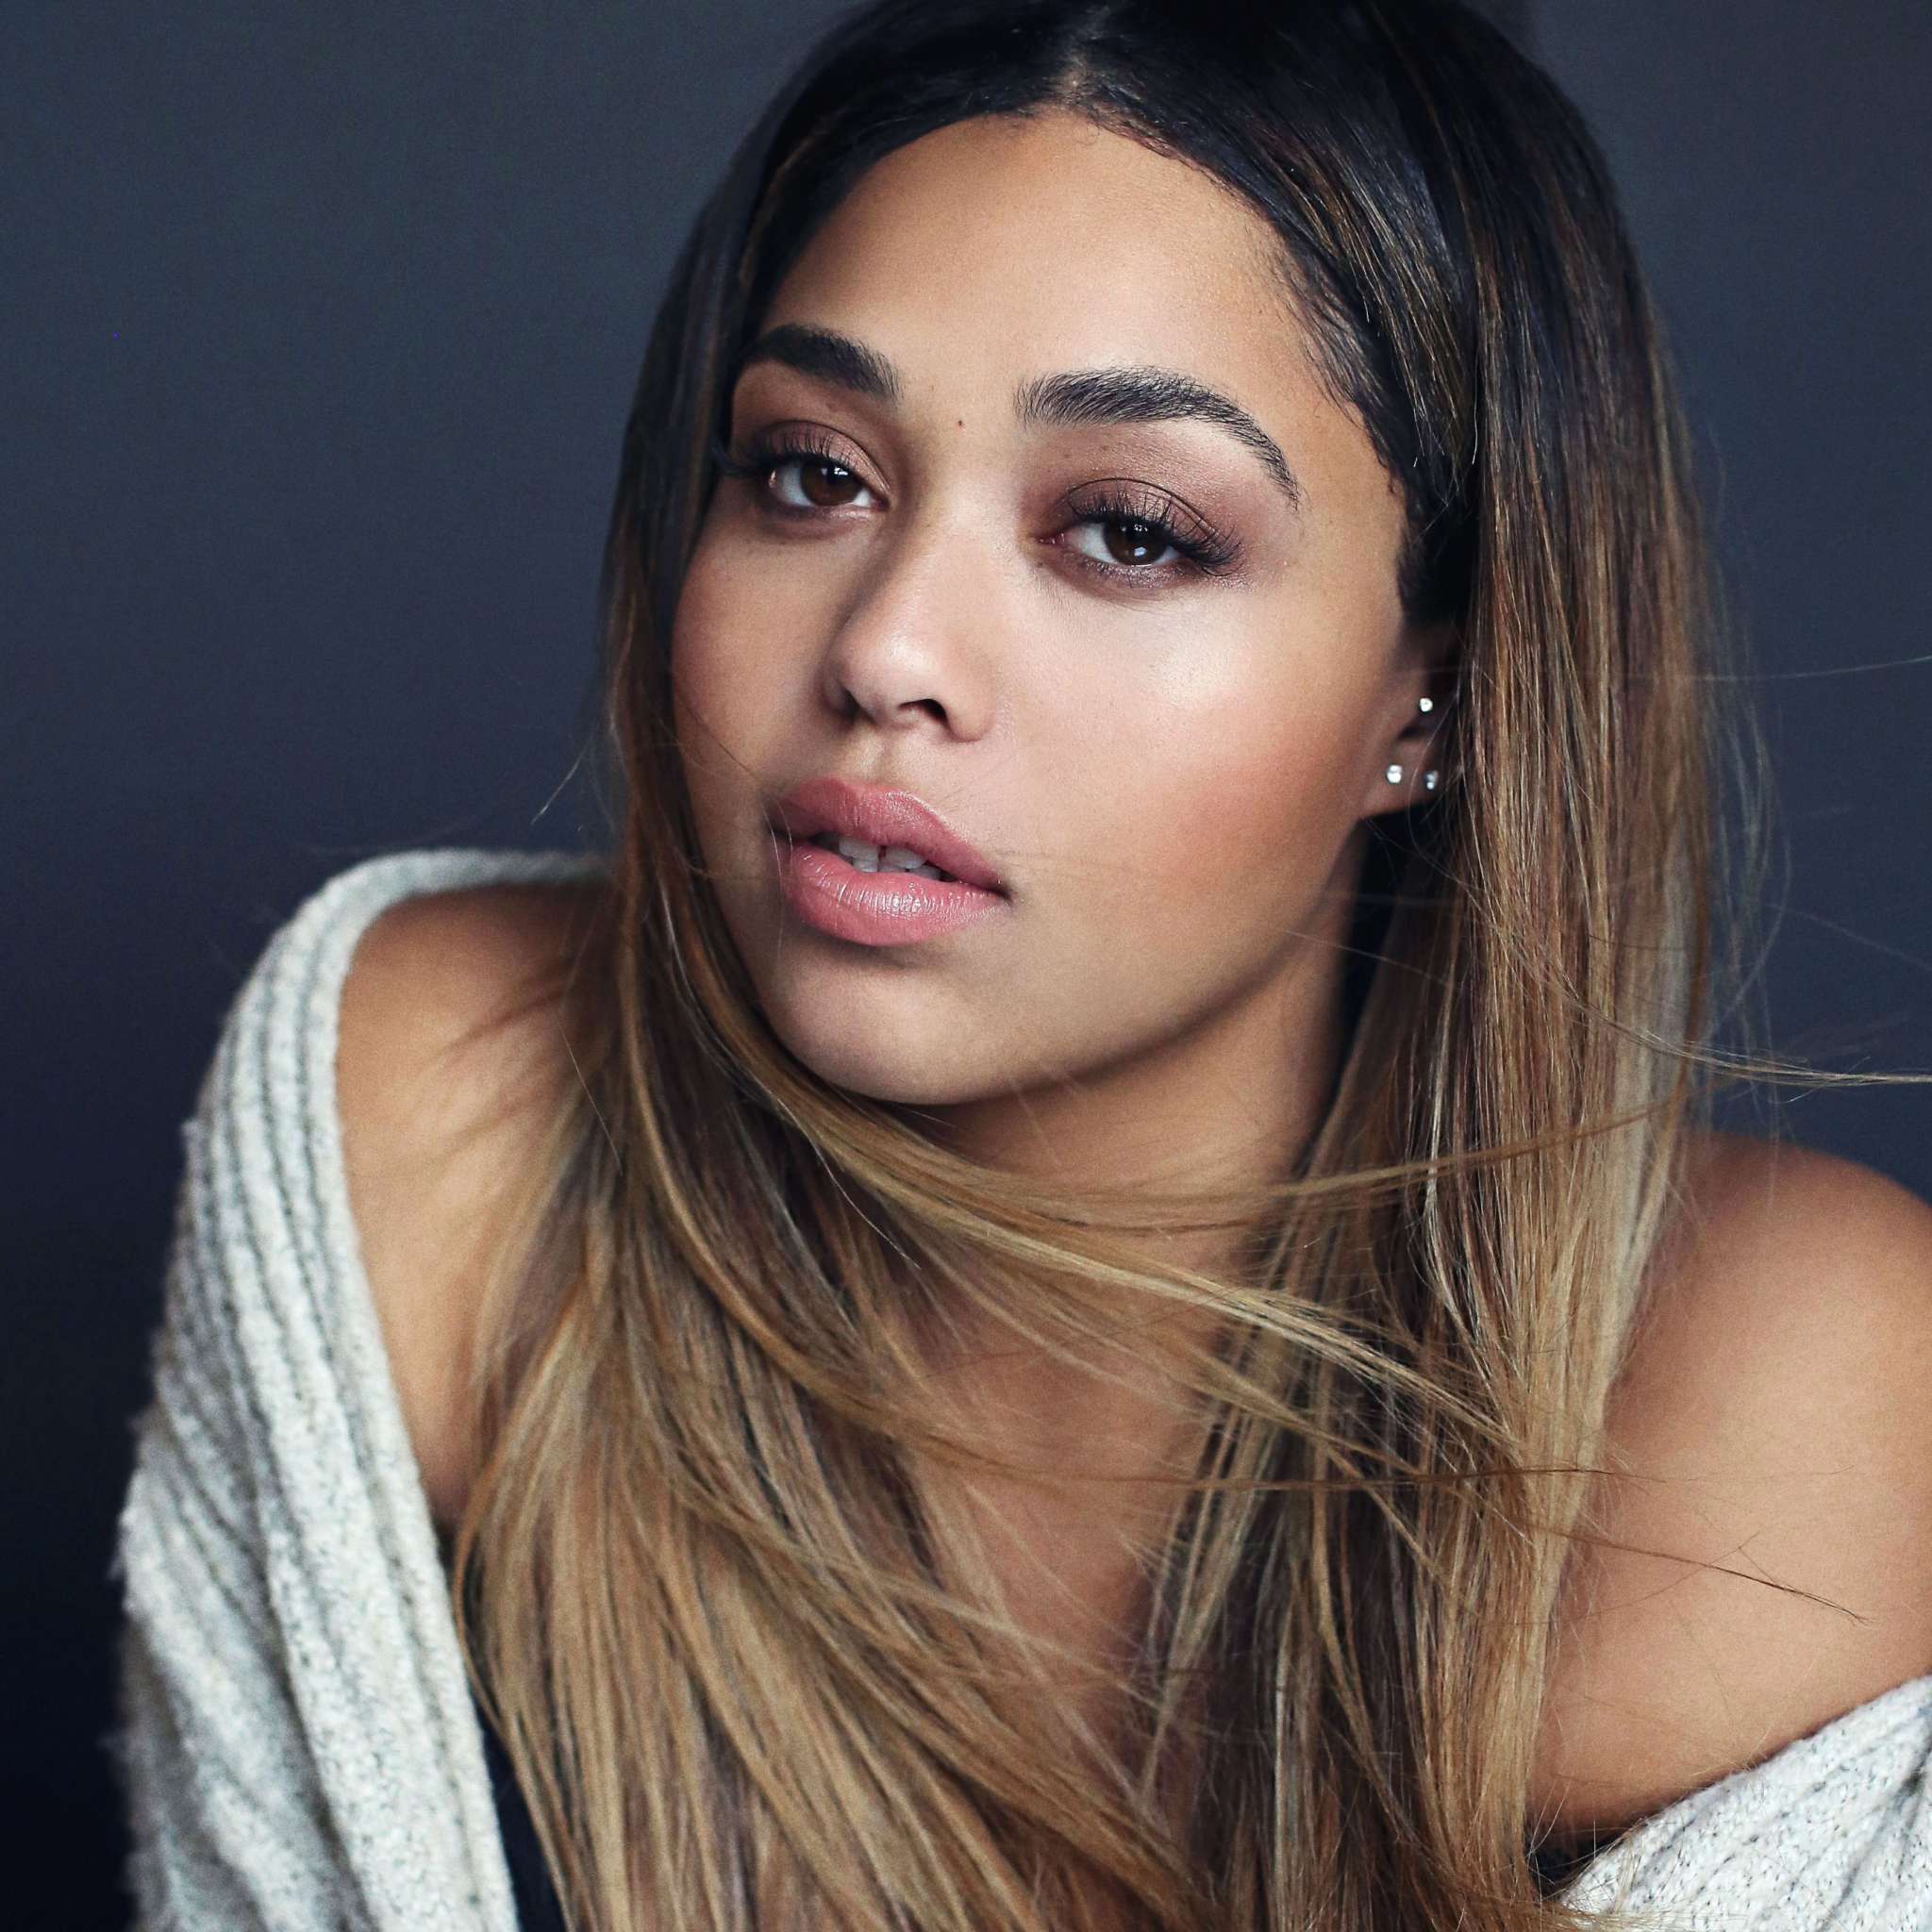 Jordyn Woods Drops Her Clothes For Valentine's Day And Fans Say She's Doing Too Much